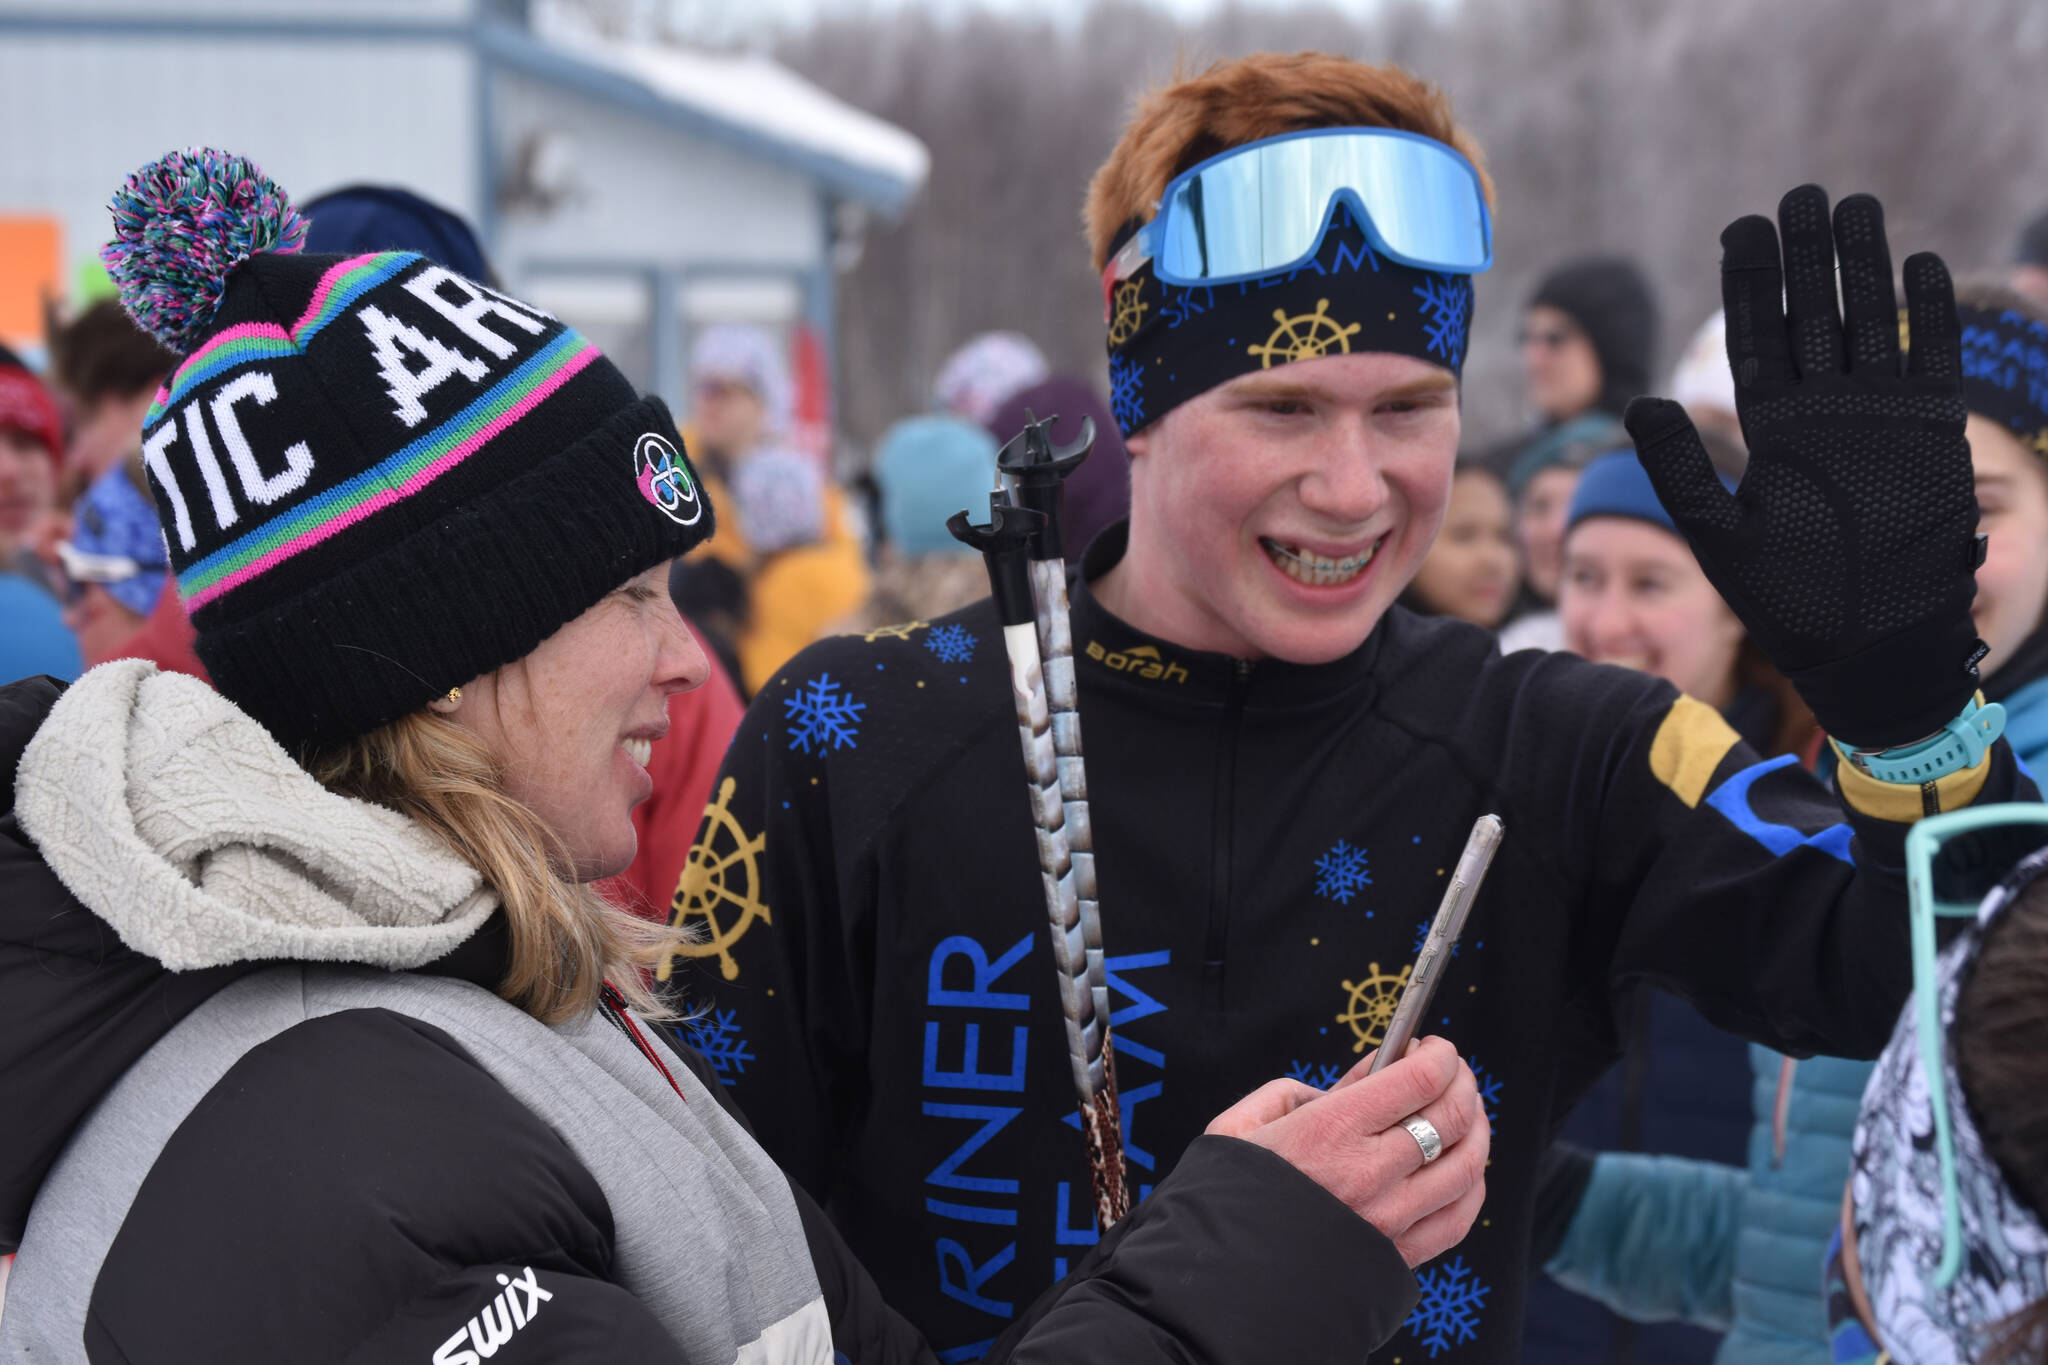 Jody Goodrich reaches out for a high five and smiles alongside Jessie Goodrich, his mother and coach, after he completed the final leg of the boys 4x5-kilometer relay and secured the Homer boys’ program-first Division II win at the ASAA State Nordic Ski Championships at Kincaid Park in Anchorage, Alaska, on Saturday, Feb. 25, 2023.